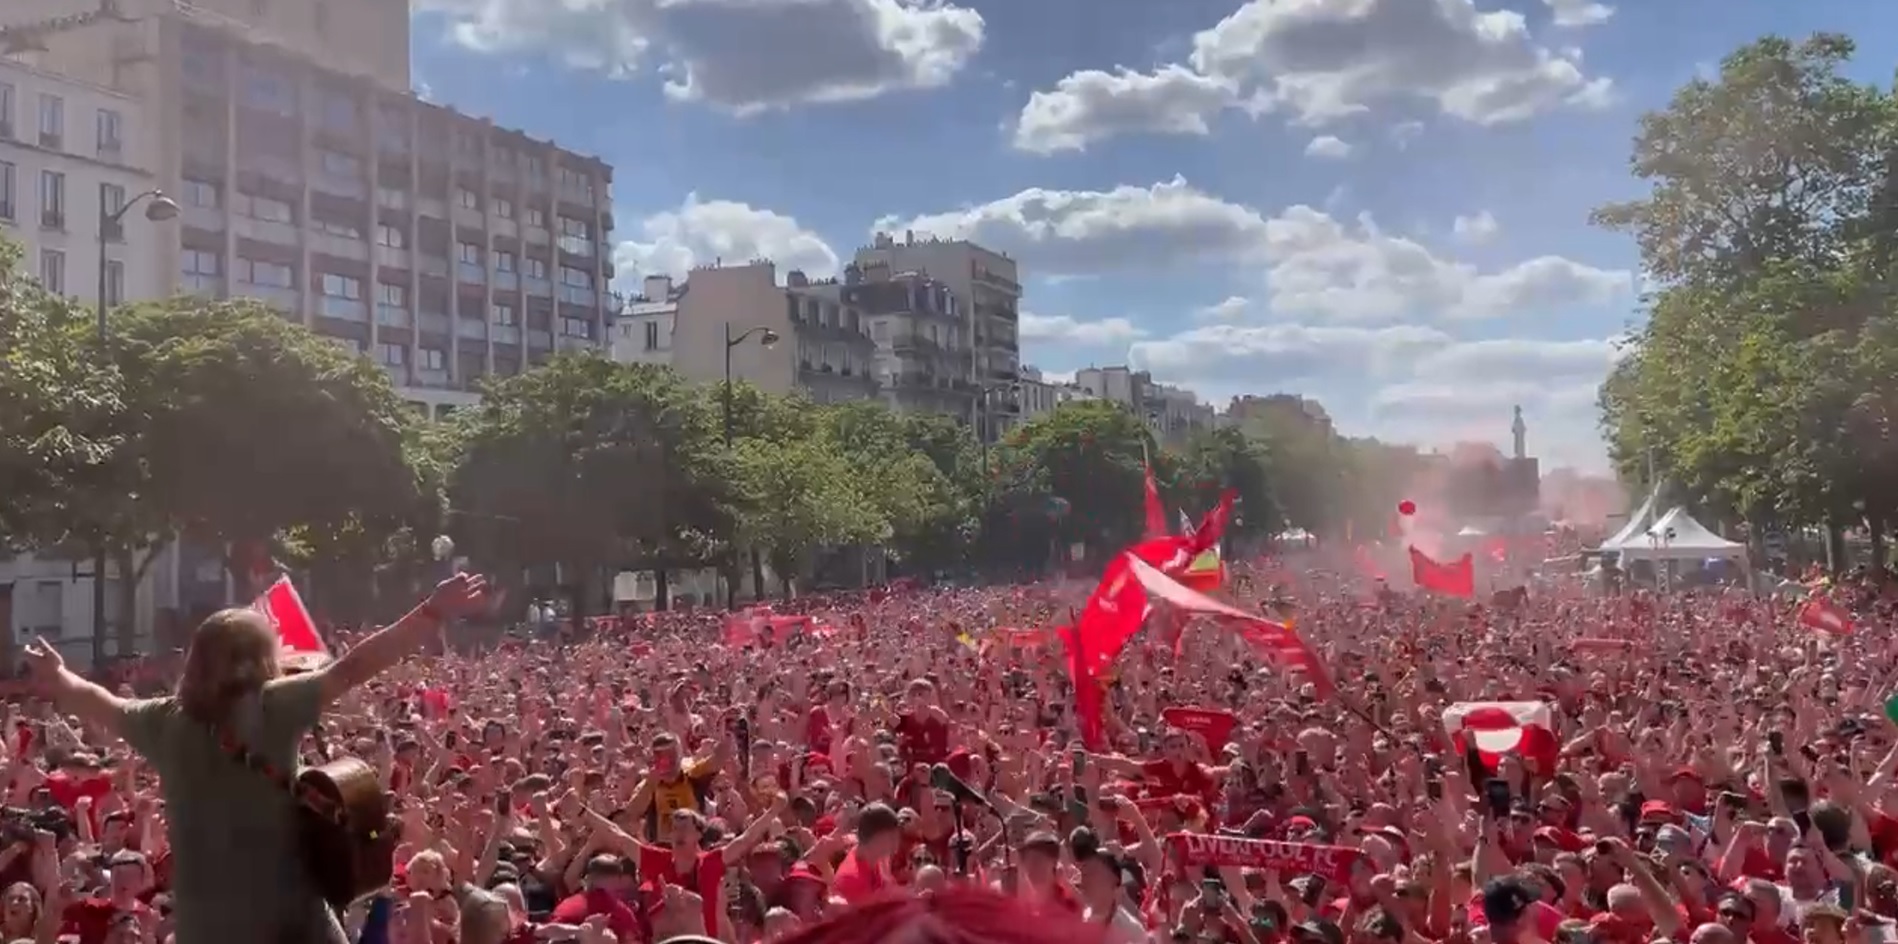 (Video) Incredible scenes of hundreds of Liverpool supporters singing the Klopp chant in Paris will blow fans’ minds